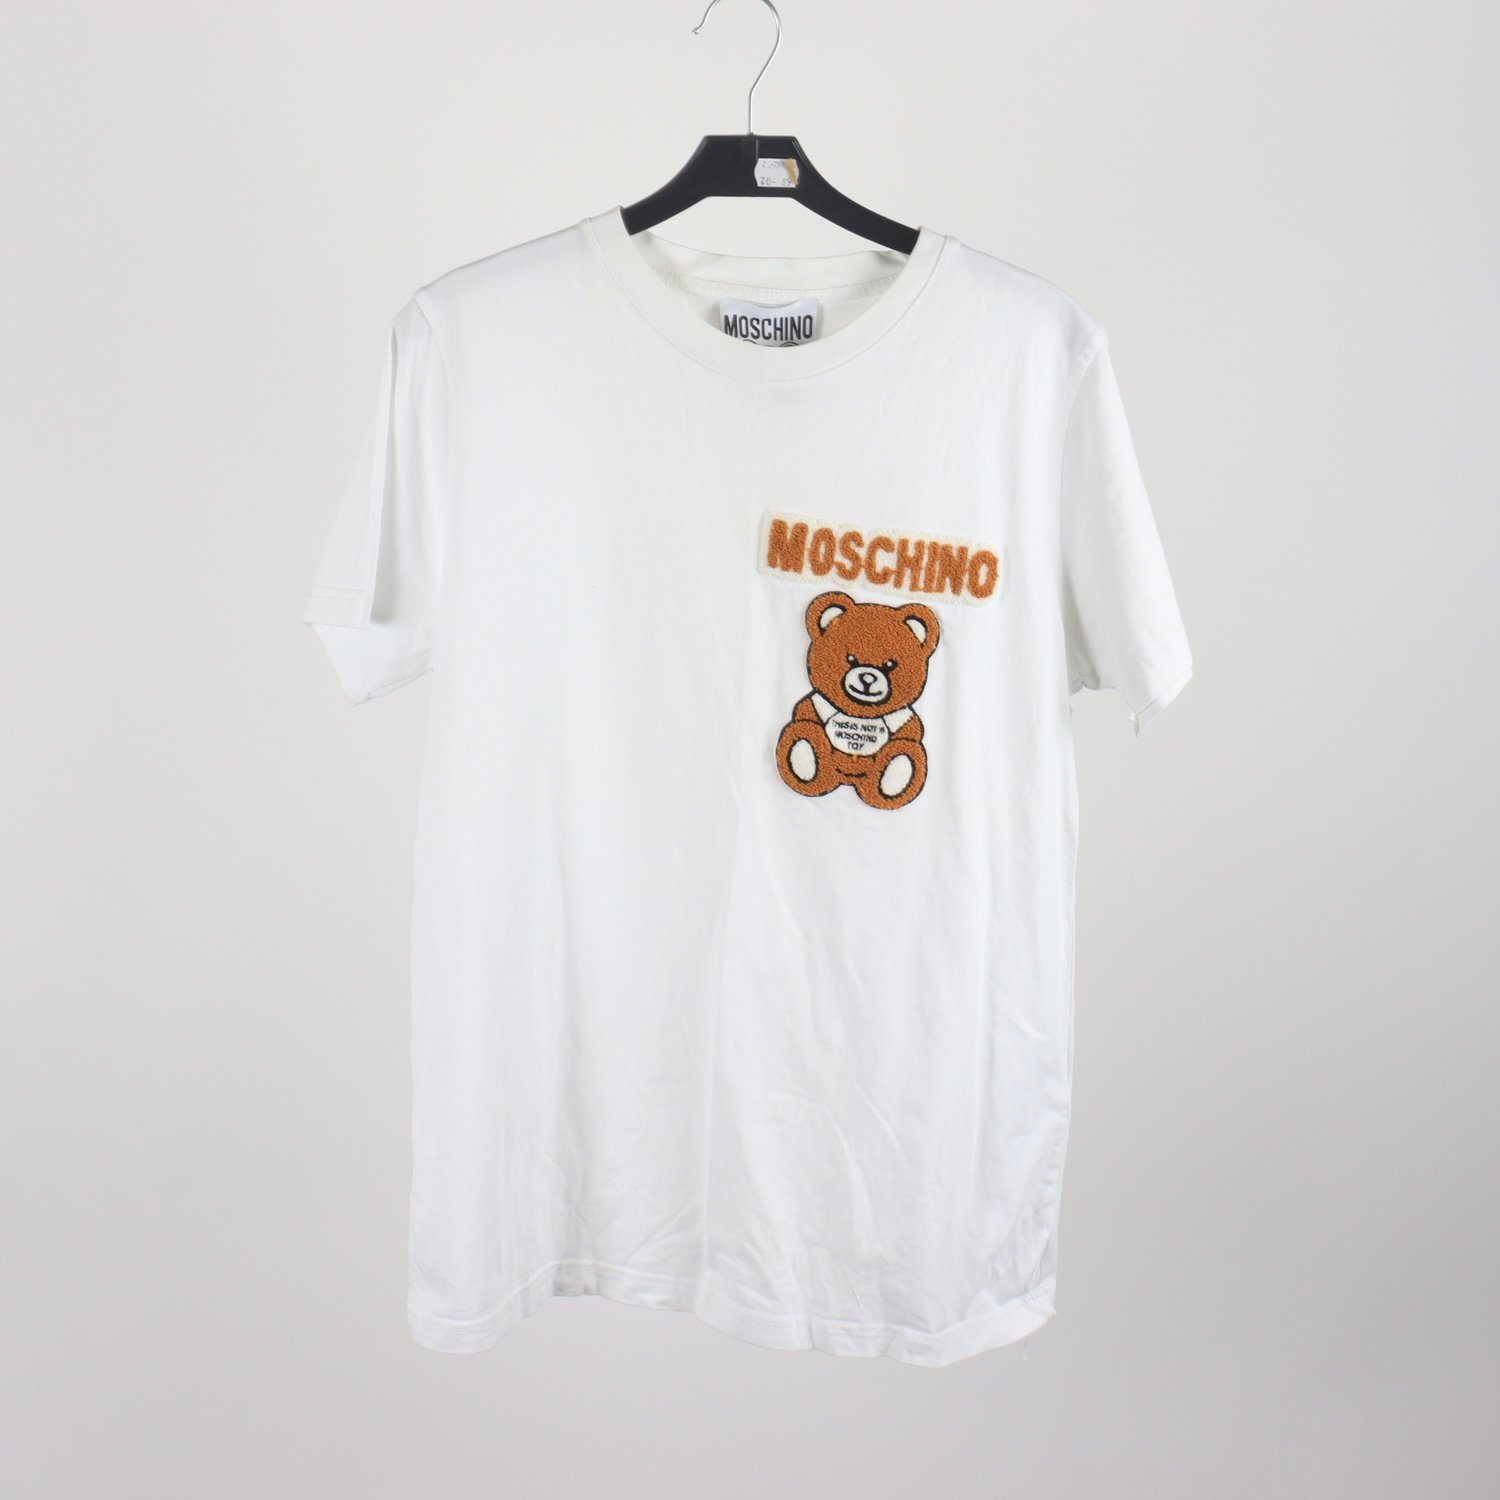 T-shirt, Moschino Couture, stl. S